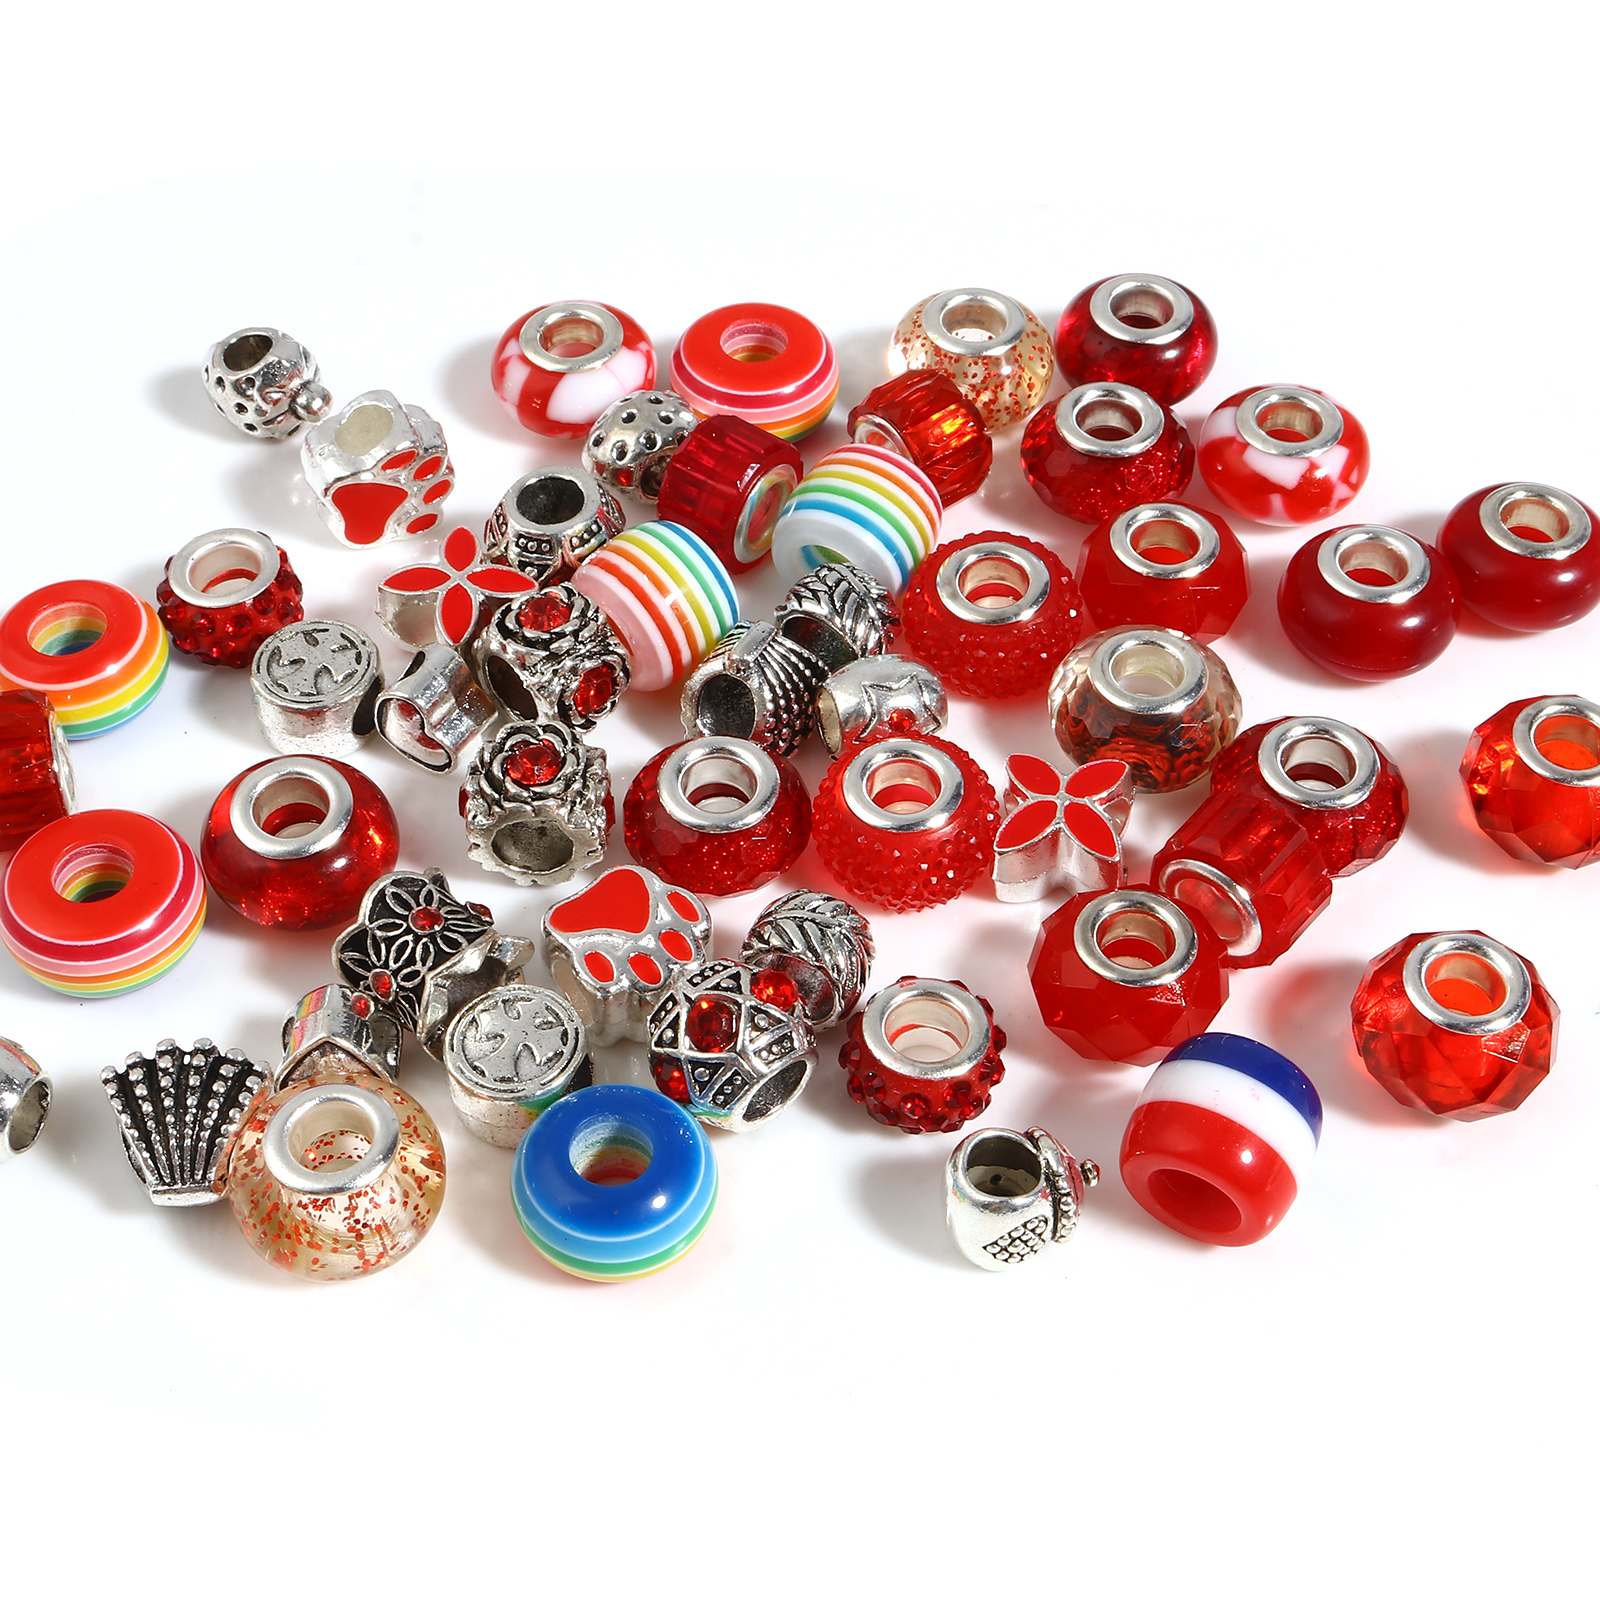 Picture of Zinc Based Alloy & Acrylic Large Hole Charm Beads Silver Tone Red Round At Random 14mm Dia., 9mm x 8mm, Hole: Approx 5.1mm - 4.5mm, 1 Set(60 Pcs/Set)